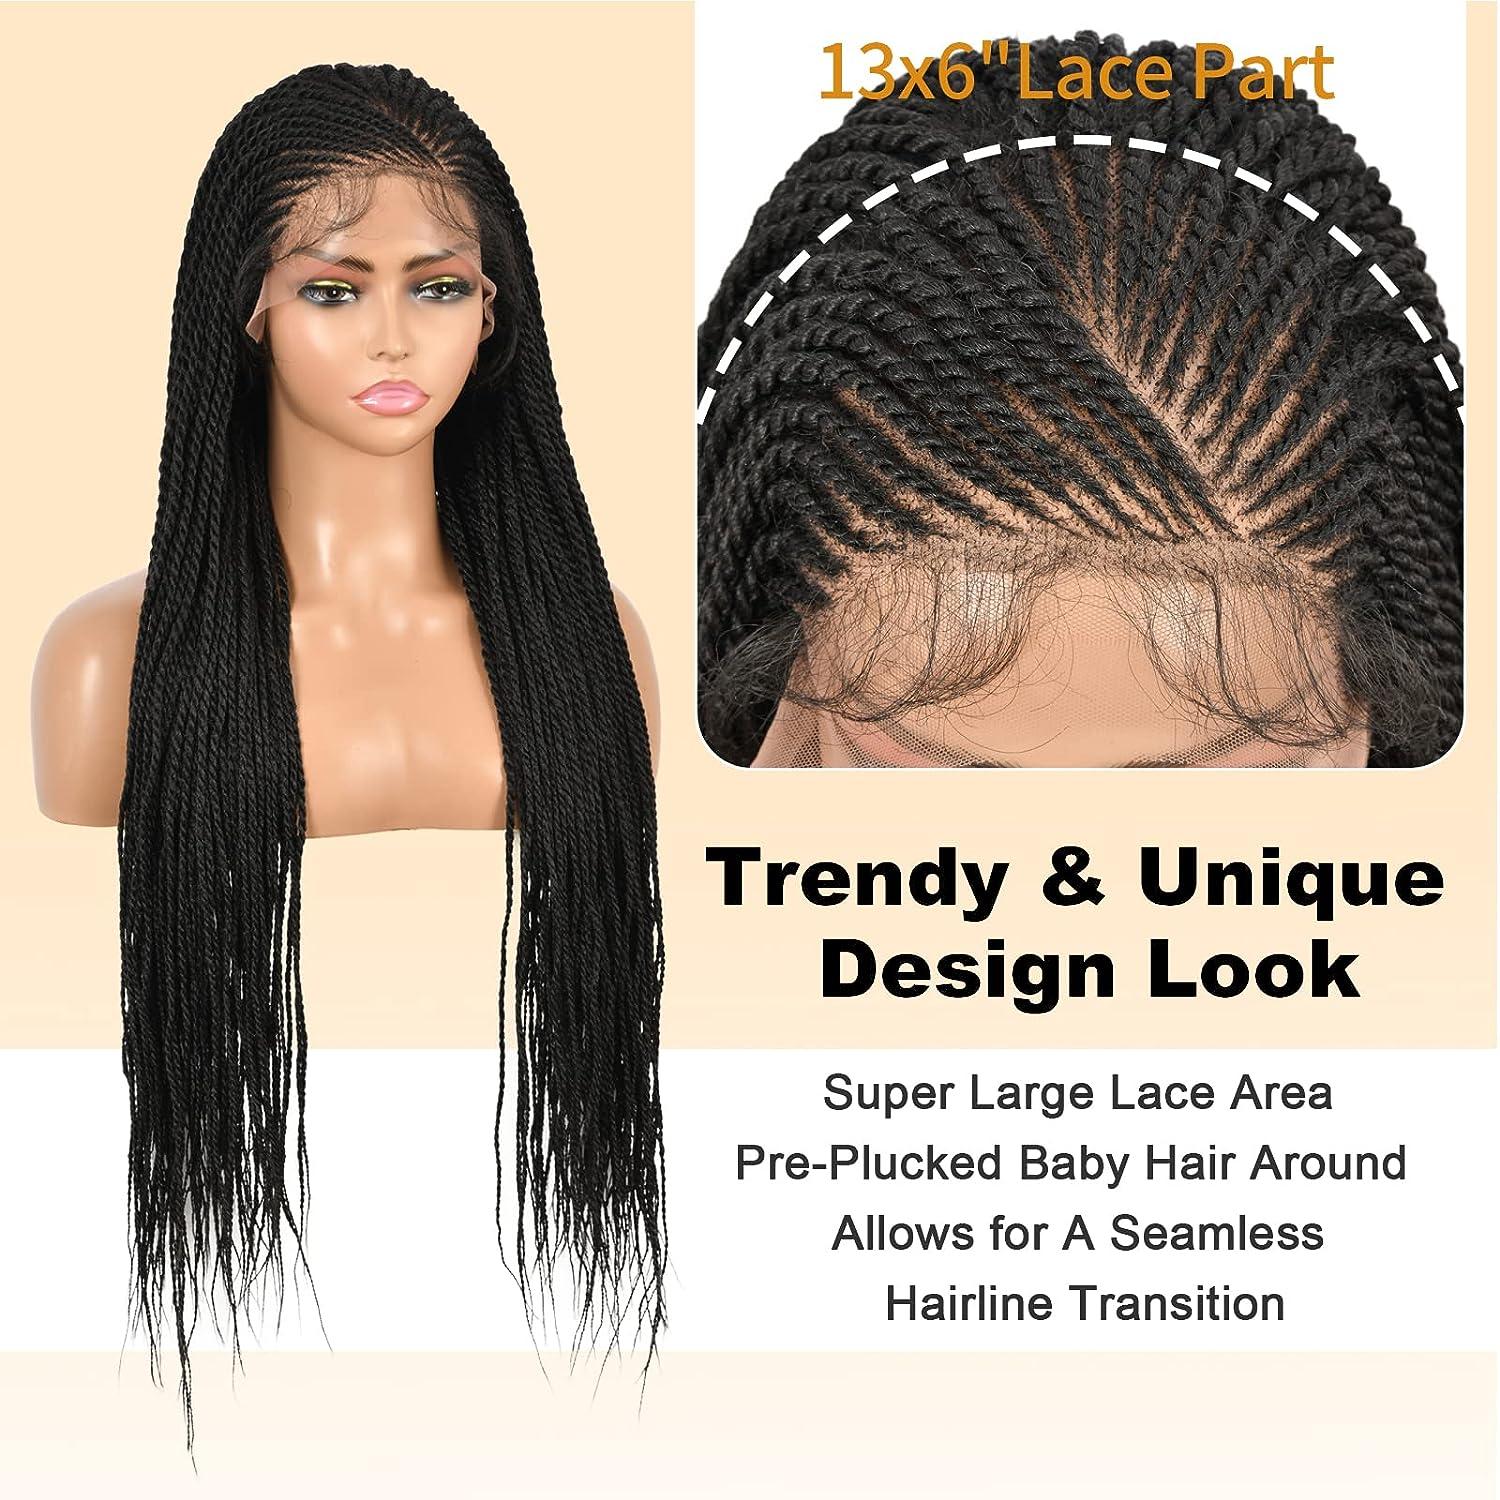 Brinbea 13X5 Lace Front Box Braided Wigs for Women 24 Black Braid Wigs with  Baby Hair Premium Synthetic Lace Frontal Cornrow Braided Hair Wigs